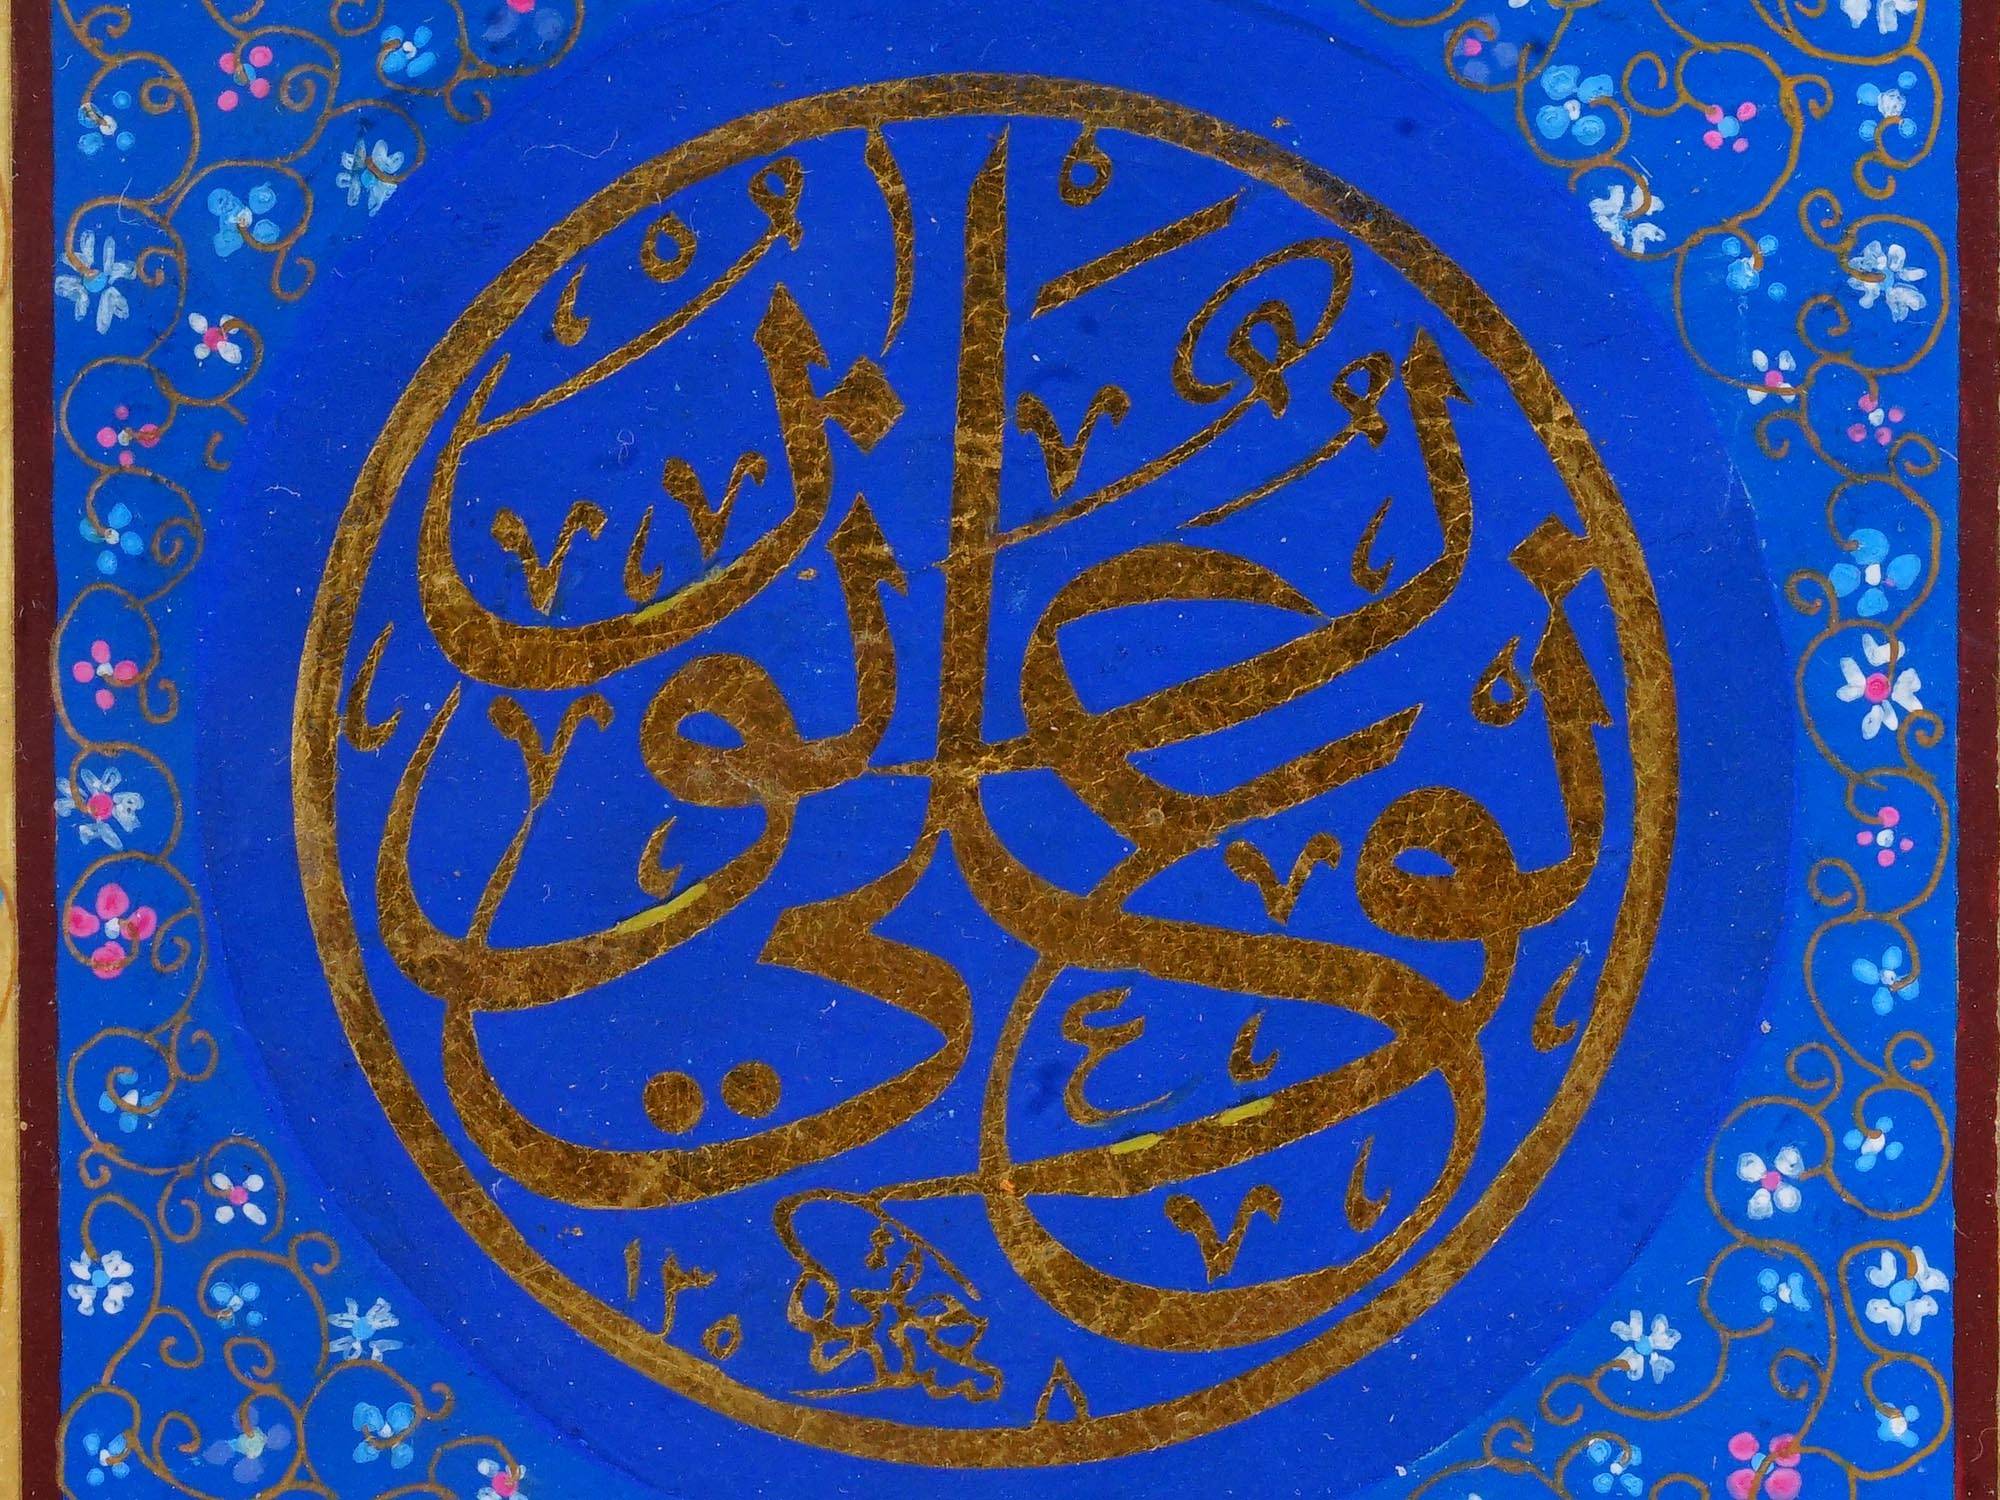 20TH C ISLAMIC CALLIGRAPHY GOLD LEAF PAINTING PIC-3